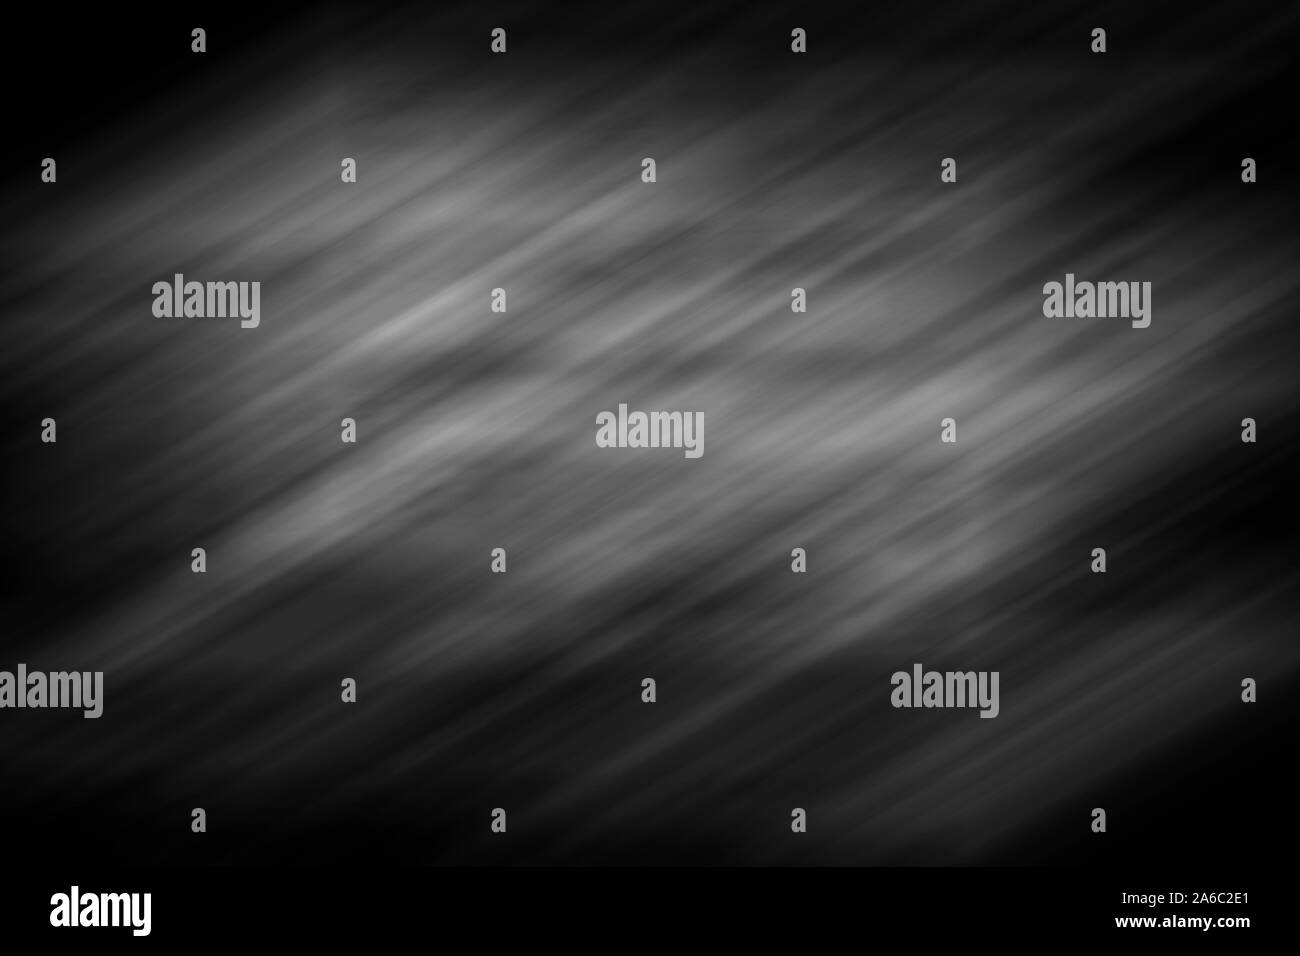 An abstract black and white grunge background image. Stock Photo